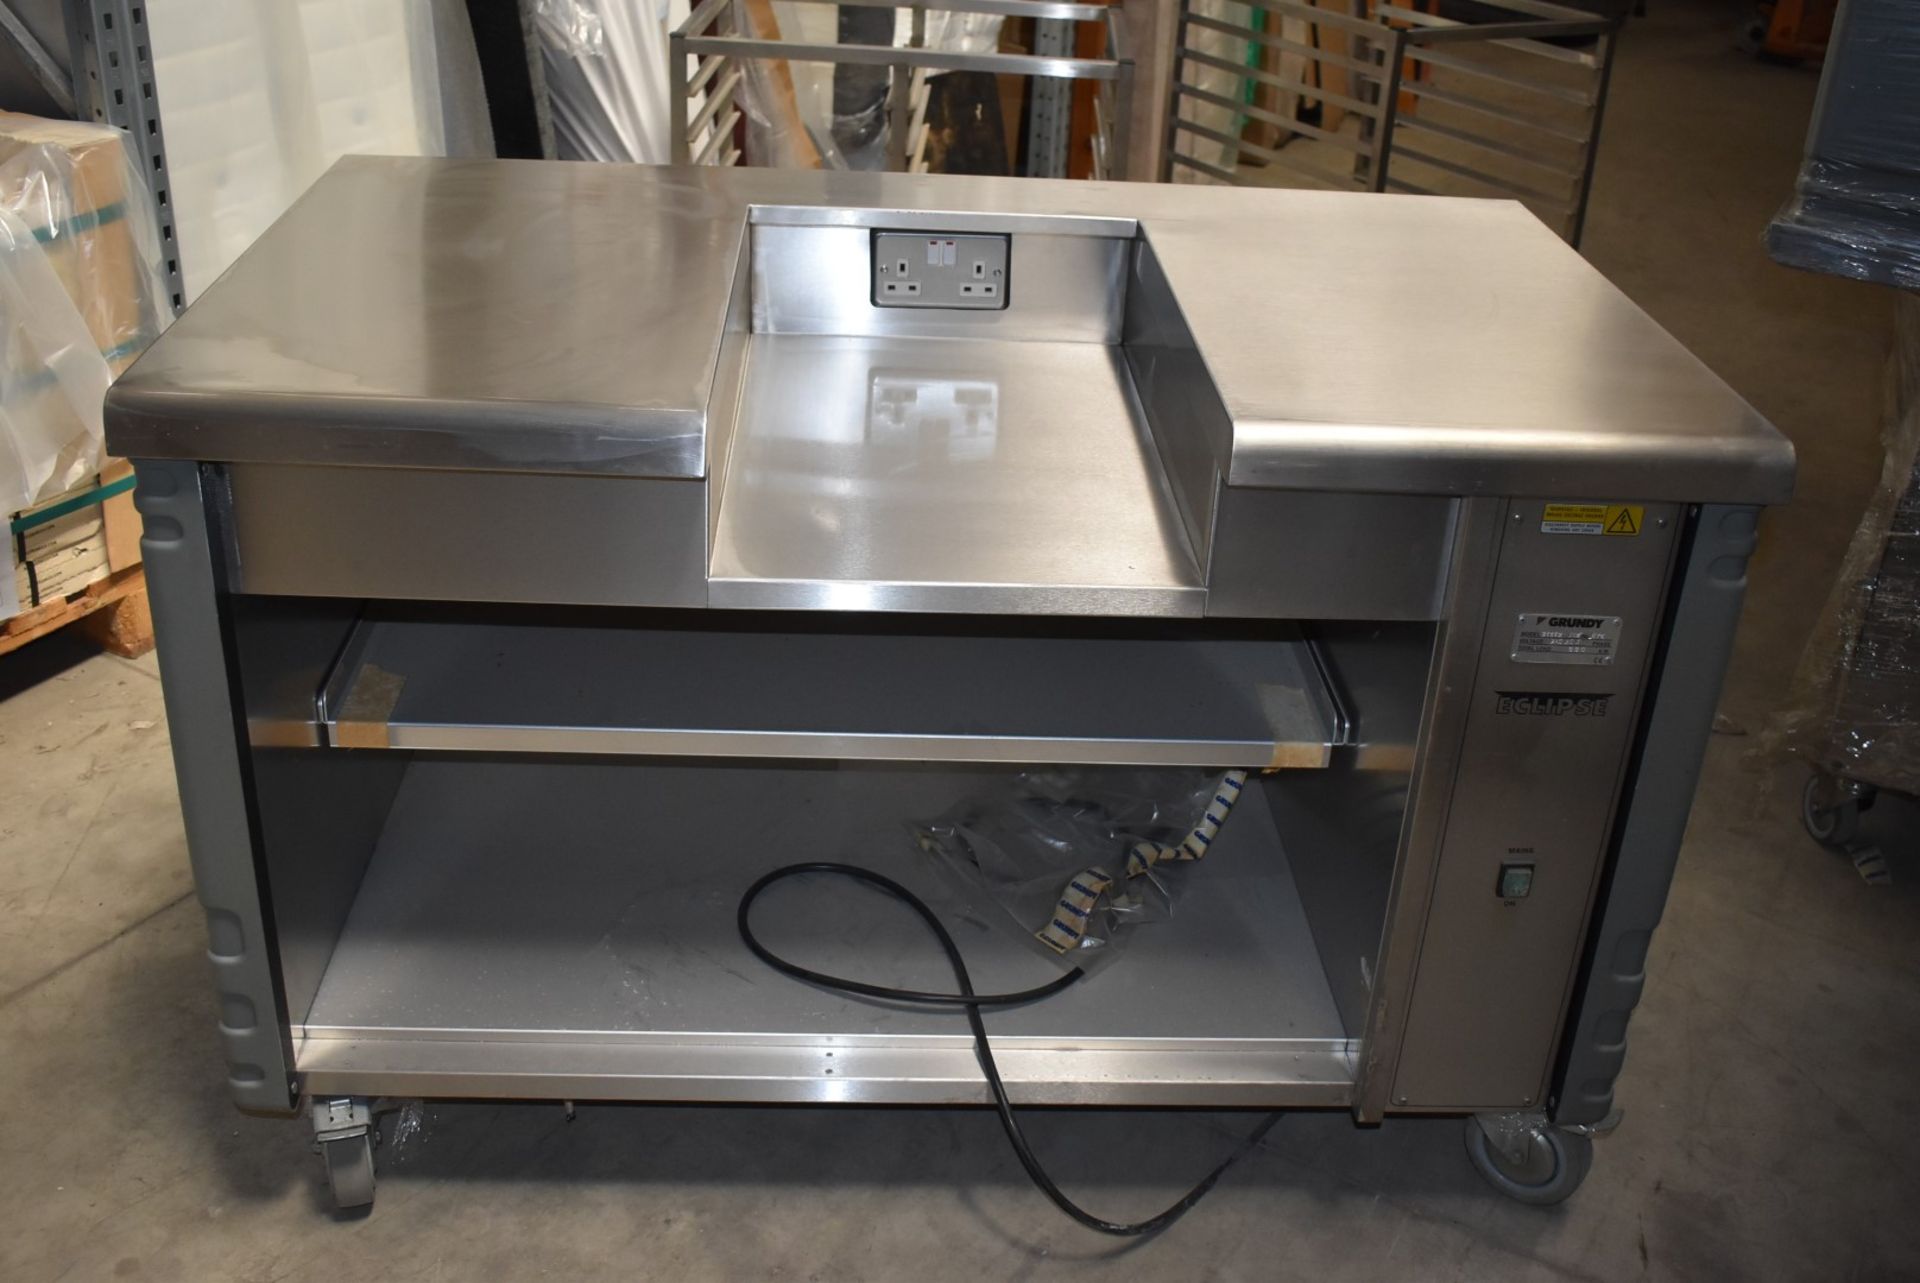 1 x Grundy Commercial Mobile Servery Unit With Stainless Steel Top Featuring Insert For Appliance or - Image 12 of 12